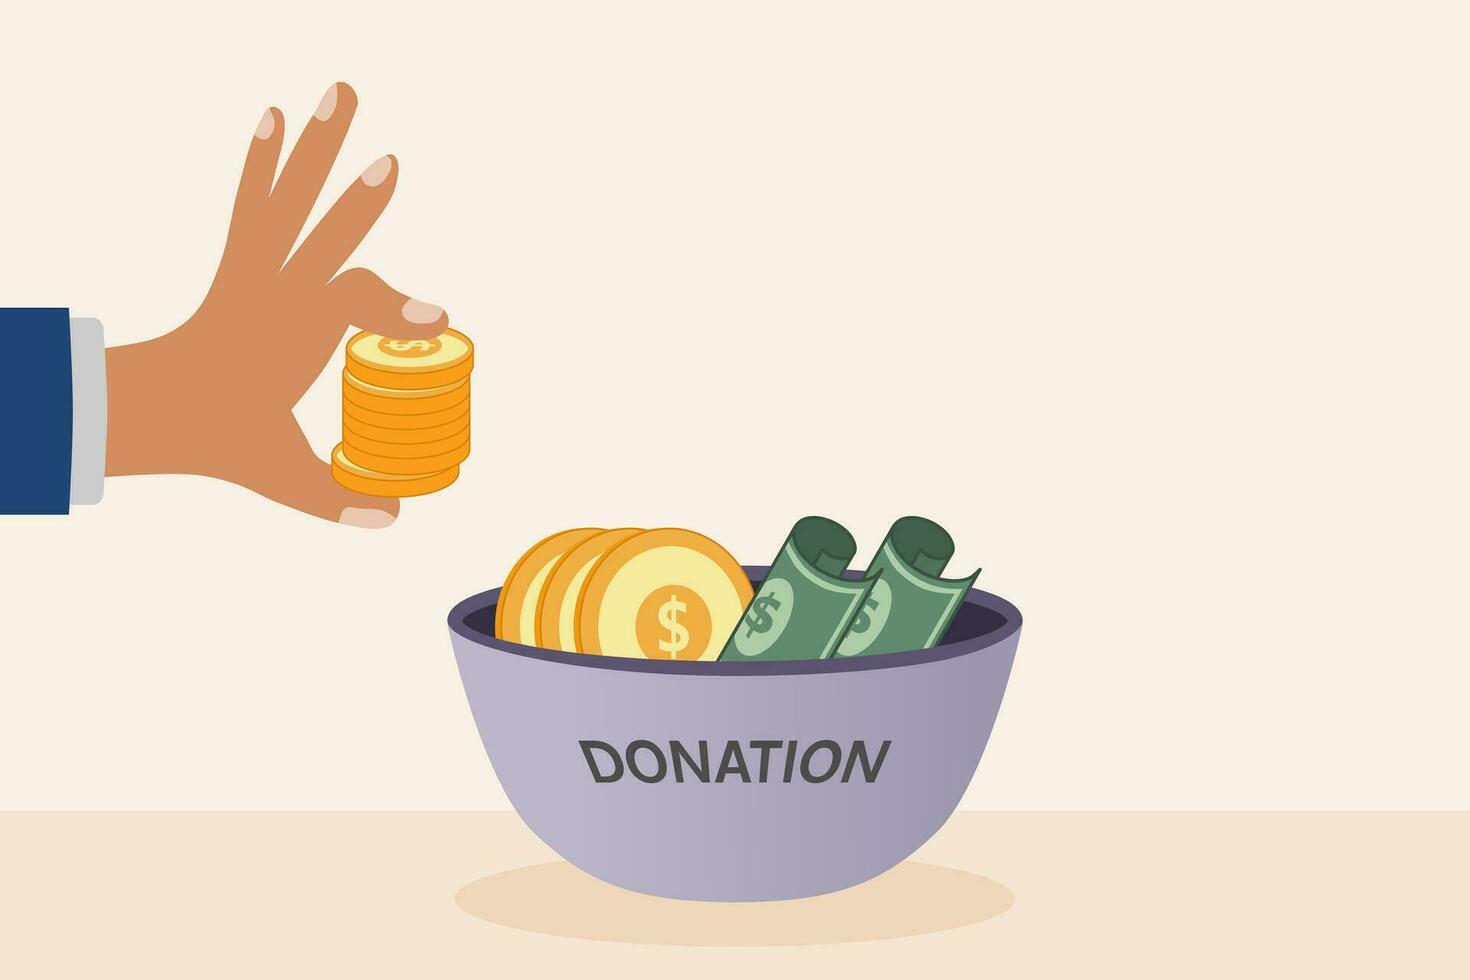 Hand putting coin in the donation bowl. Donation and charity concept. Vector illustration.